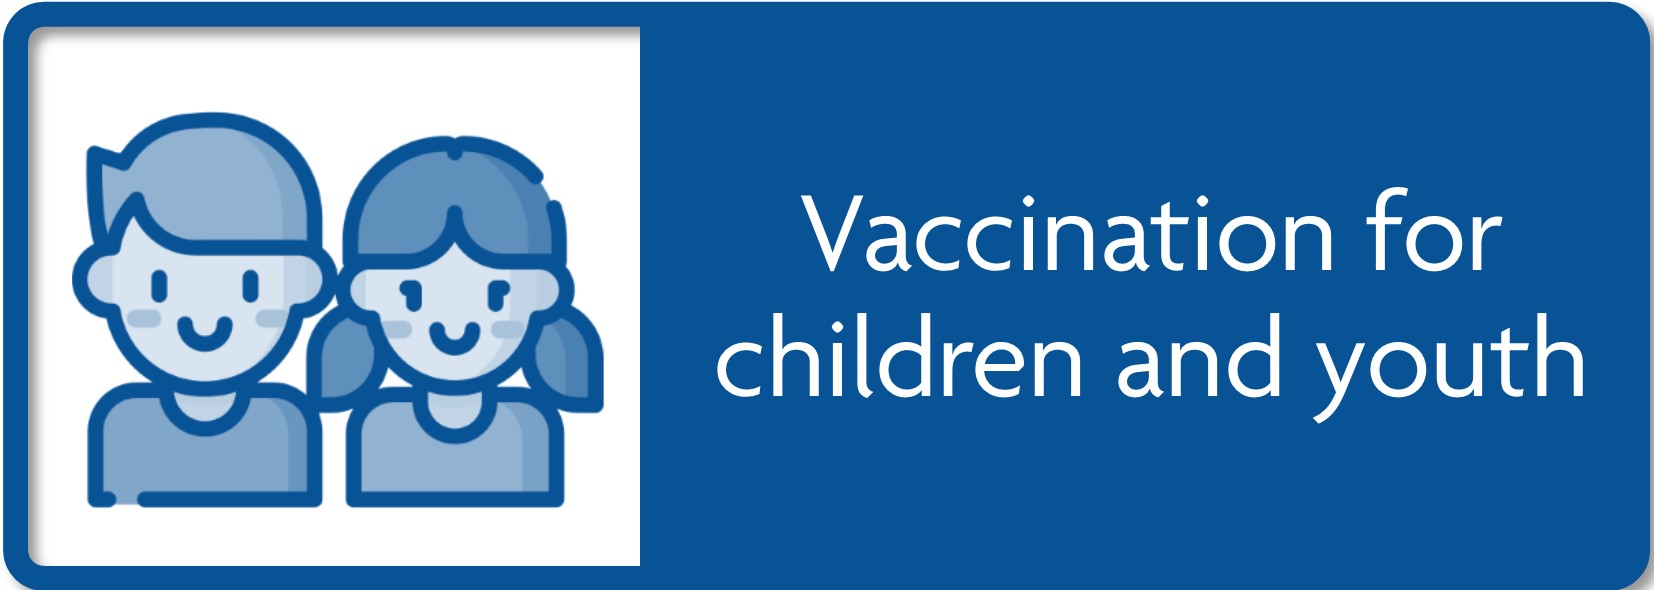 Vaccination for children and youth